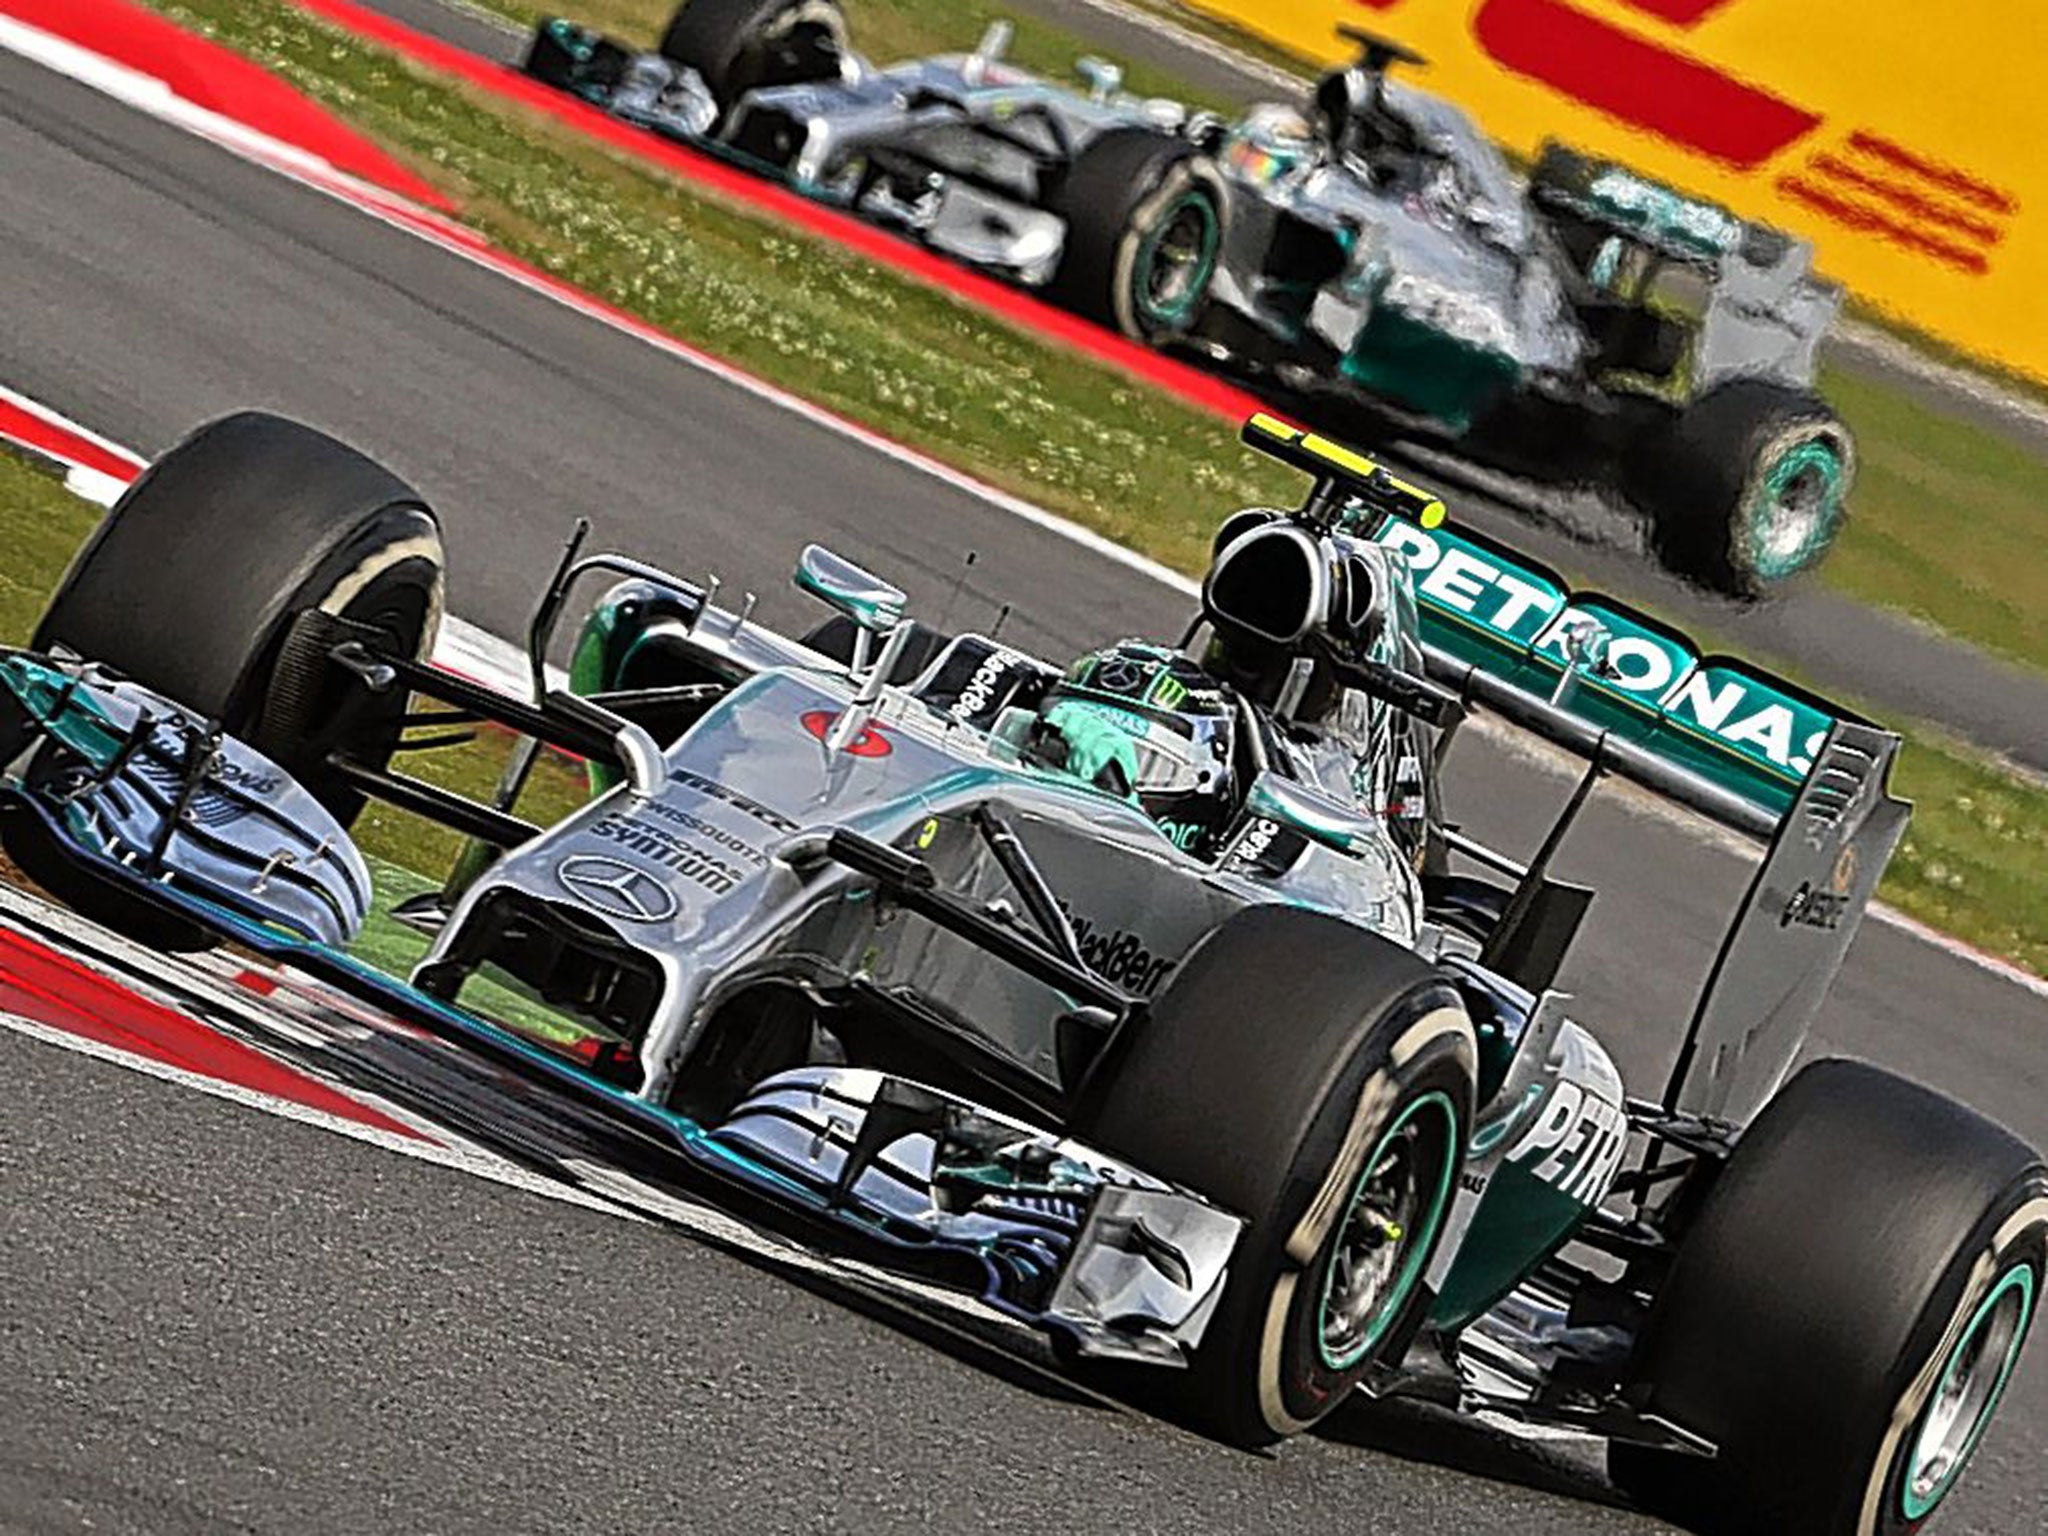 Nico Rosberg drives ahead of Lewis Hamilton at Sunday’s British Grand Prix. The head-to-head between the Mercedes team-mates has delivered at times breathless racing